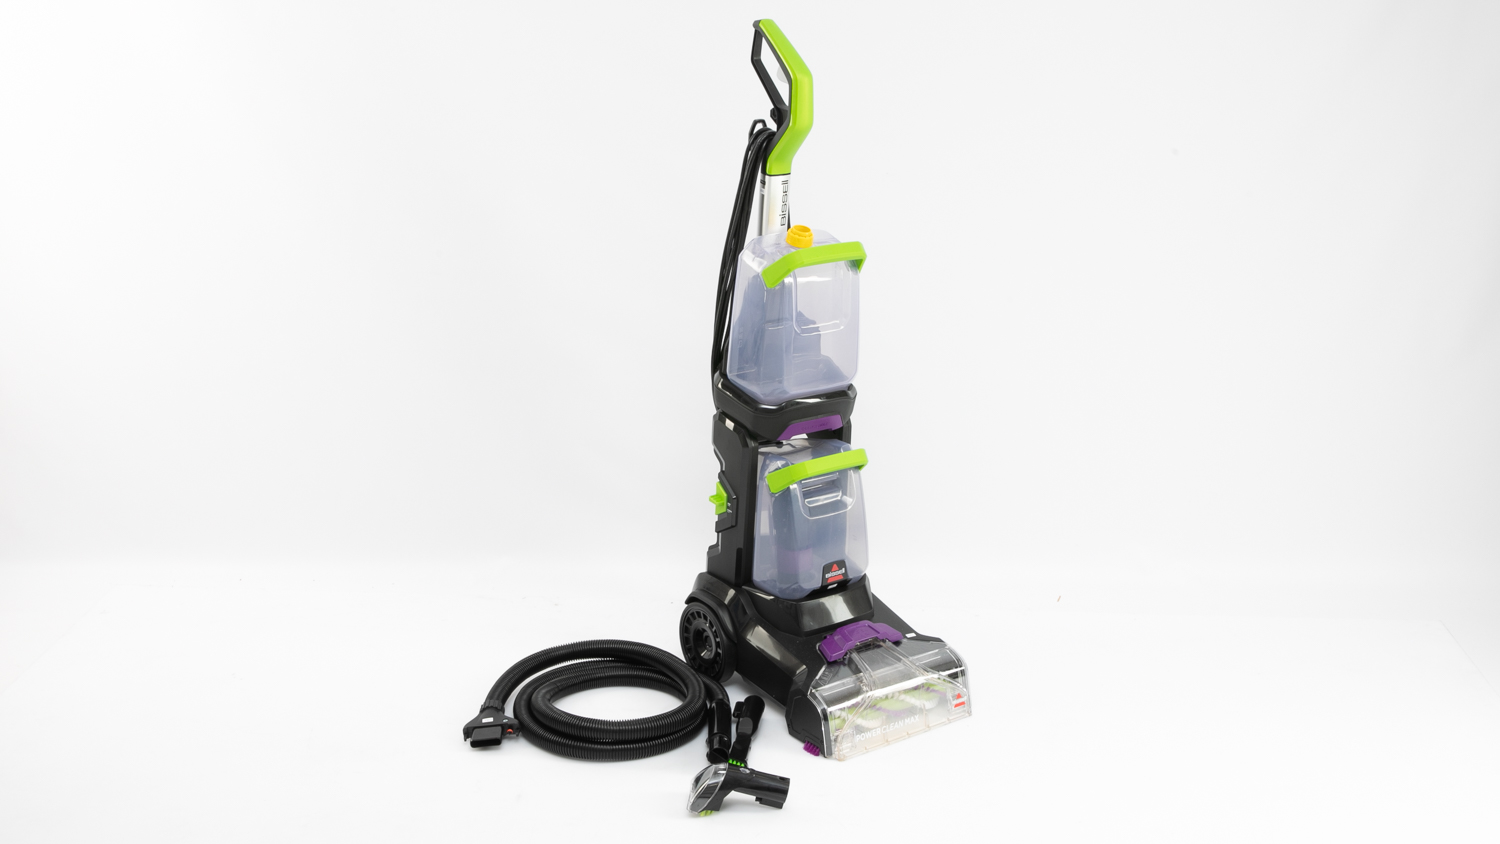 Bissell Power Clean Max Carpet Shampooer (3112F) carousel image